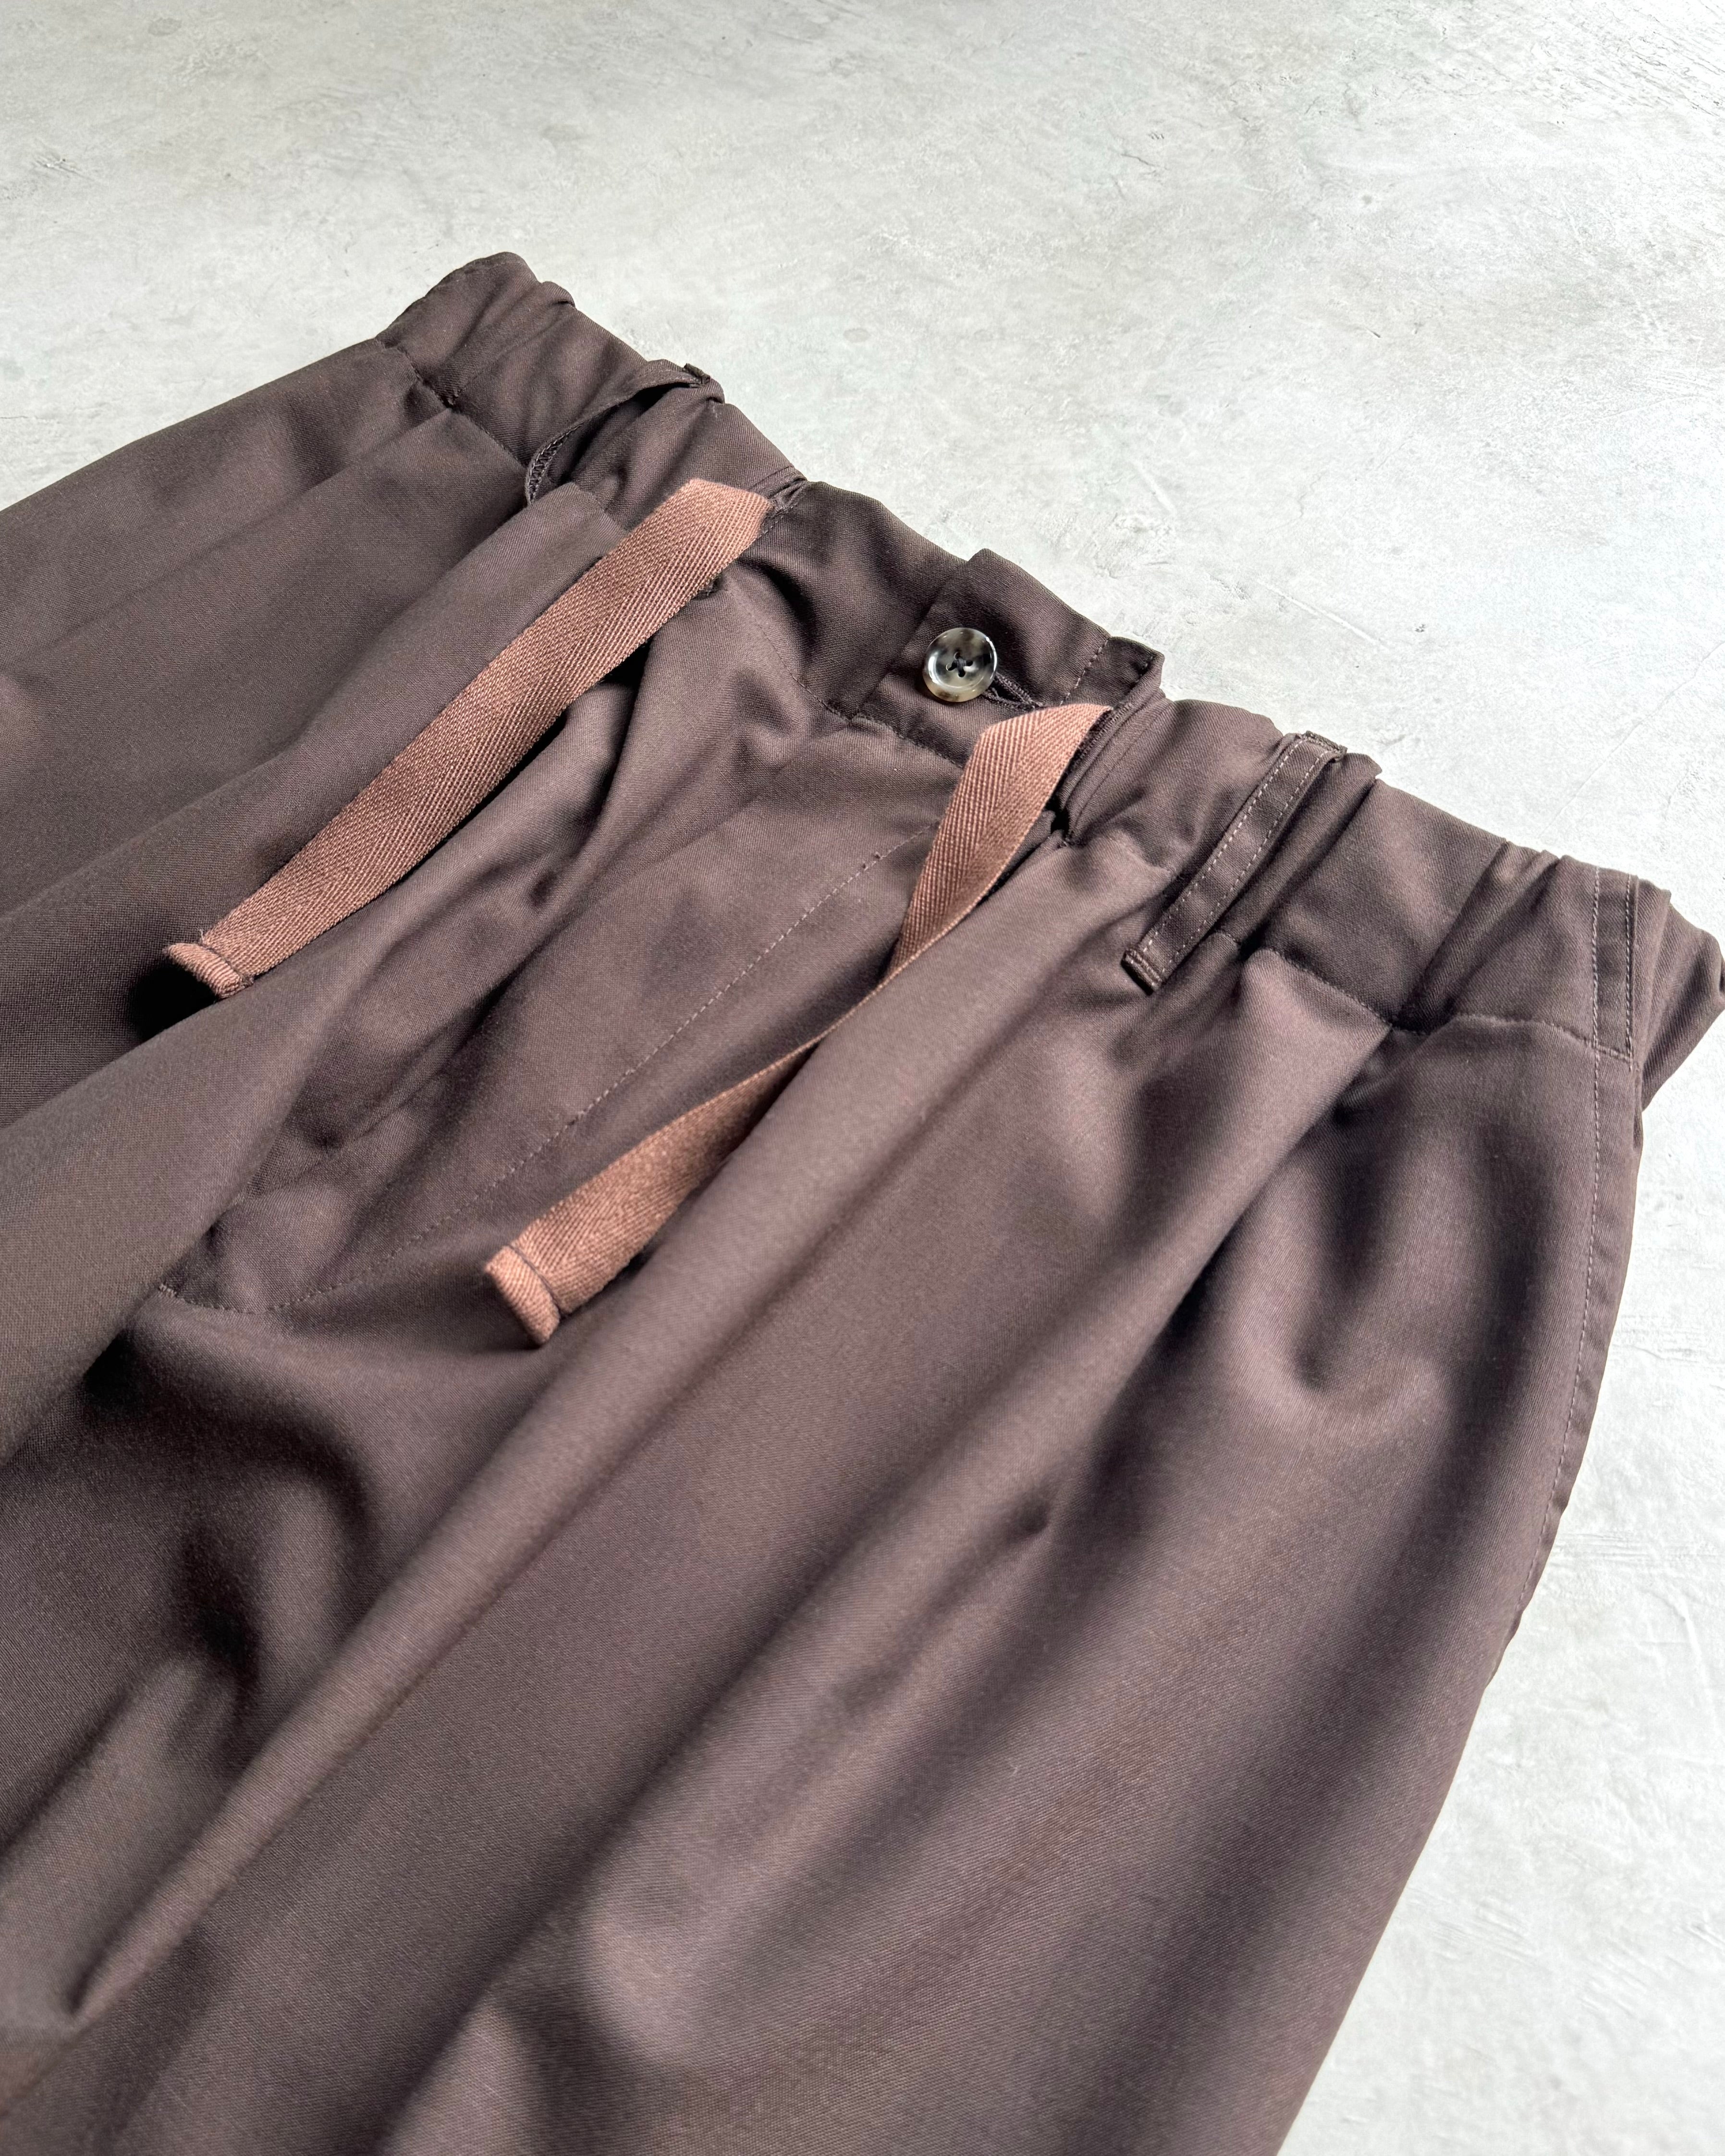 Sillage / baggy Trousers - BROWN